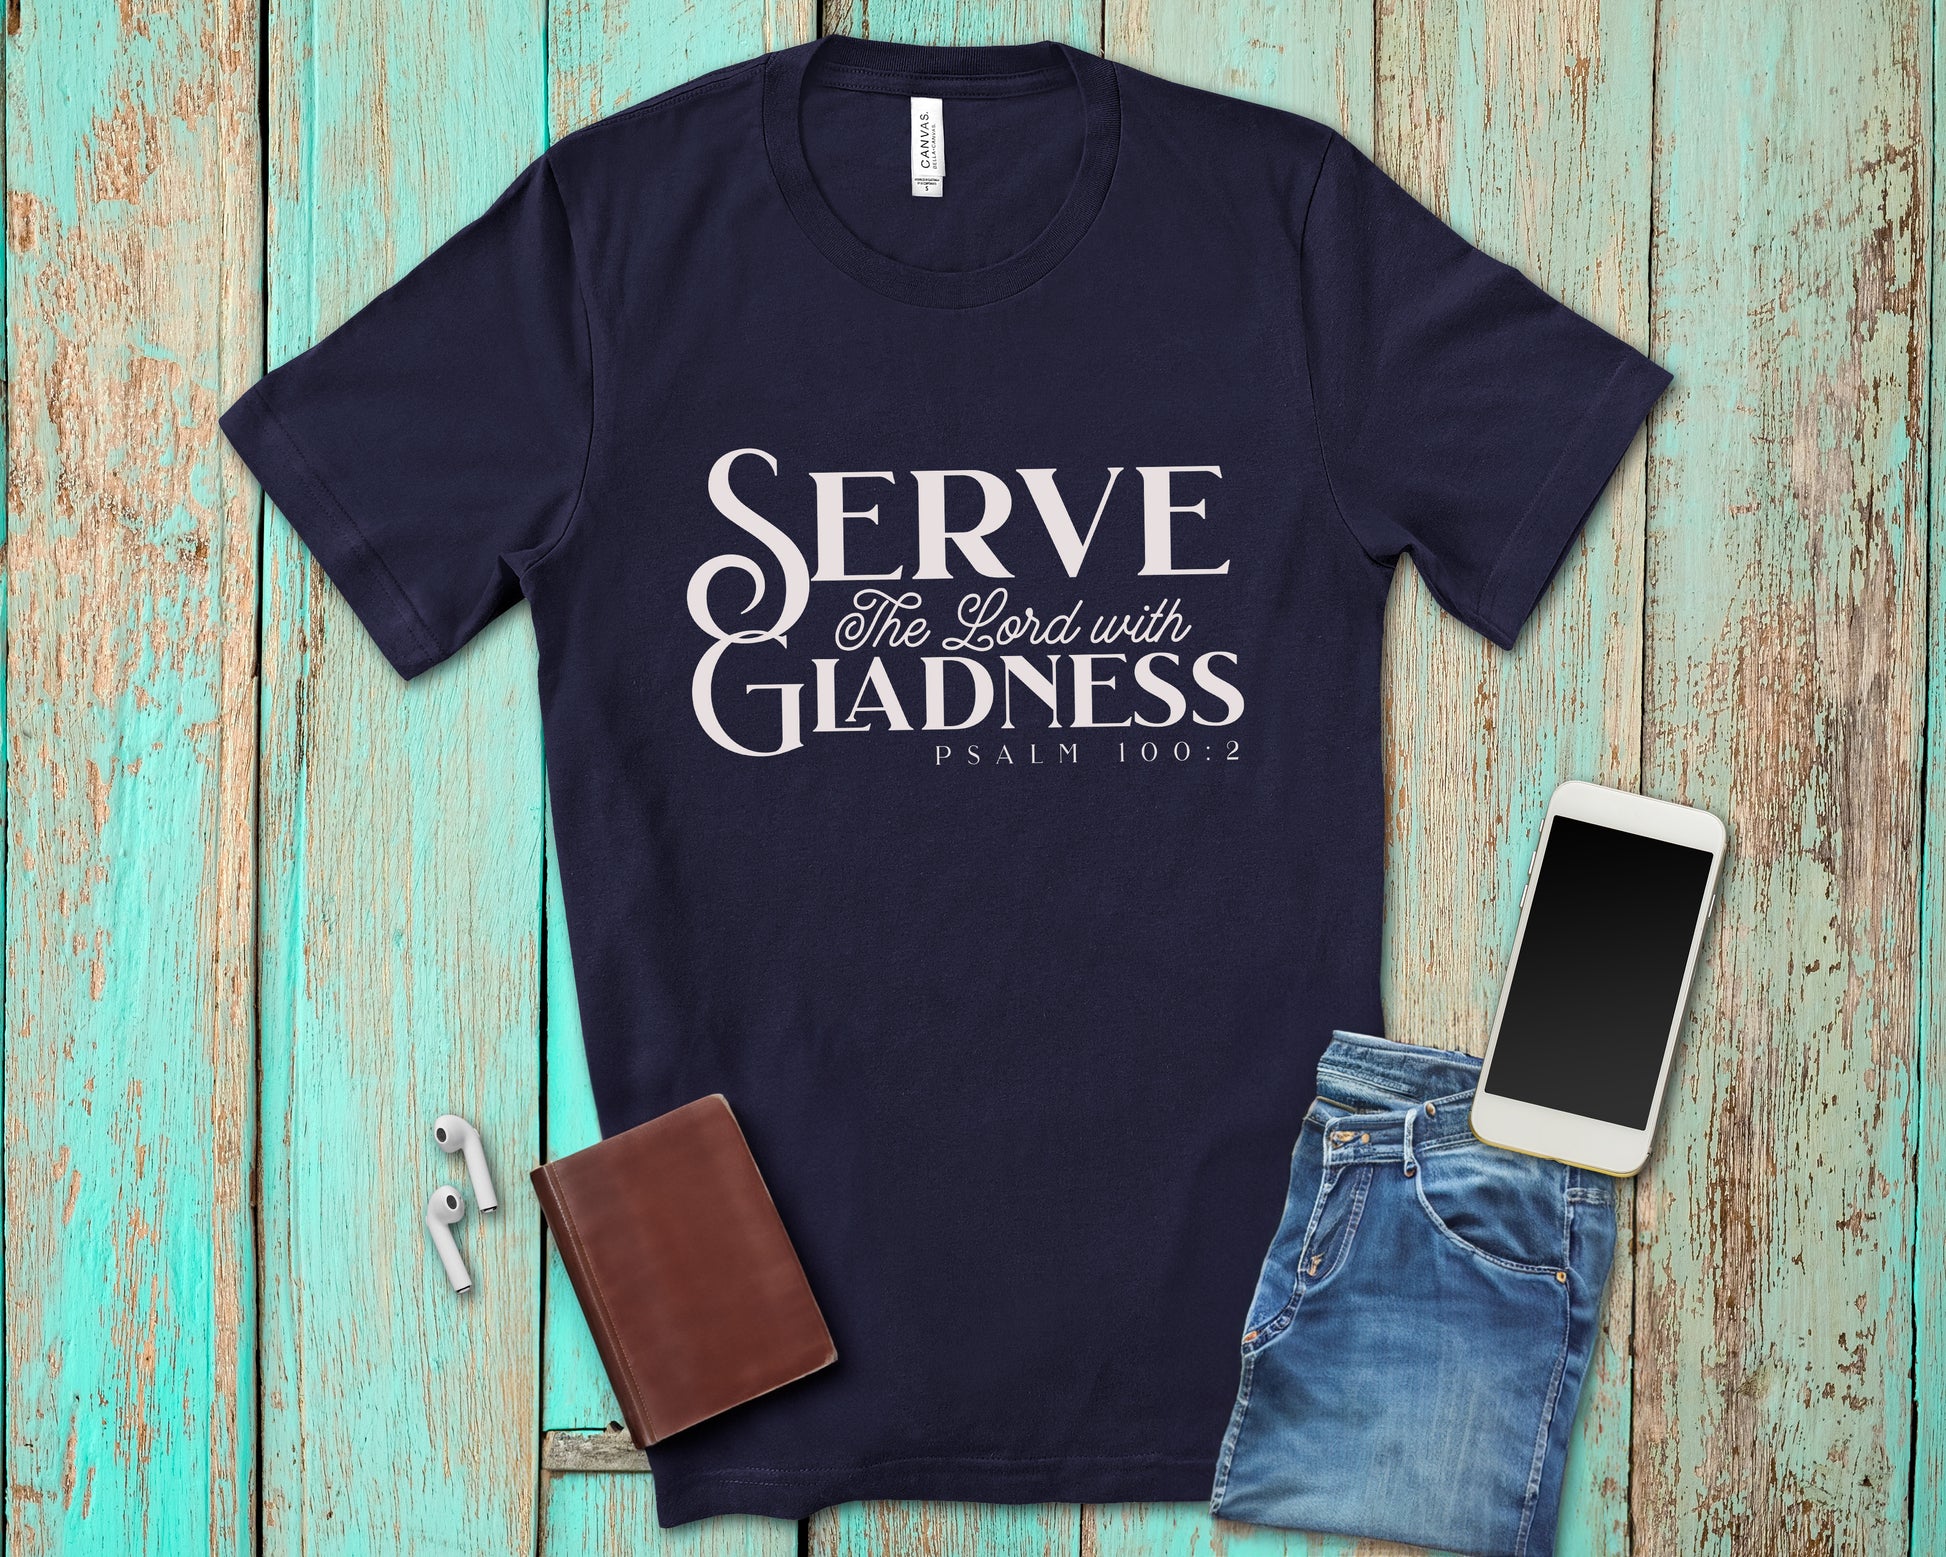 Bible Verse Shirt, Serve the Lord tshirt, Christian tshirt to Encourage and inspire Christians-T-Shirts-PureDesignTees